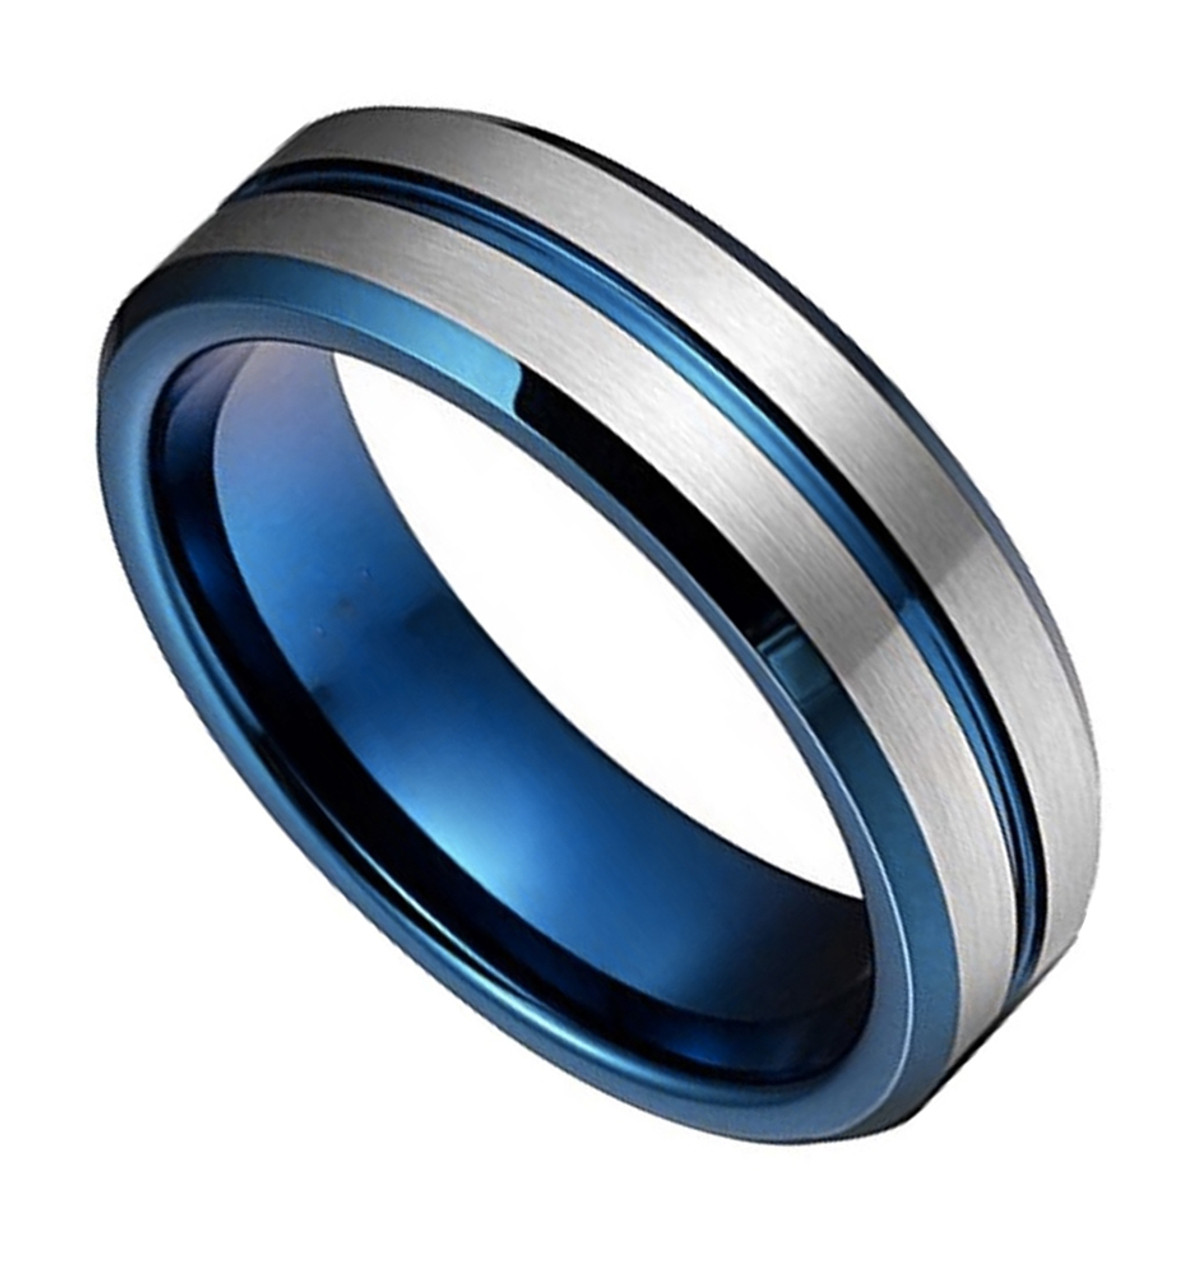 (6mm) Unisex, Women's or Men's Gray and Blue Tungsten Carbide Wedding Ring Band. Grooved with Matte Finish and Beveled Edges.